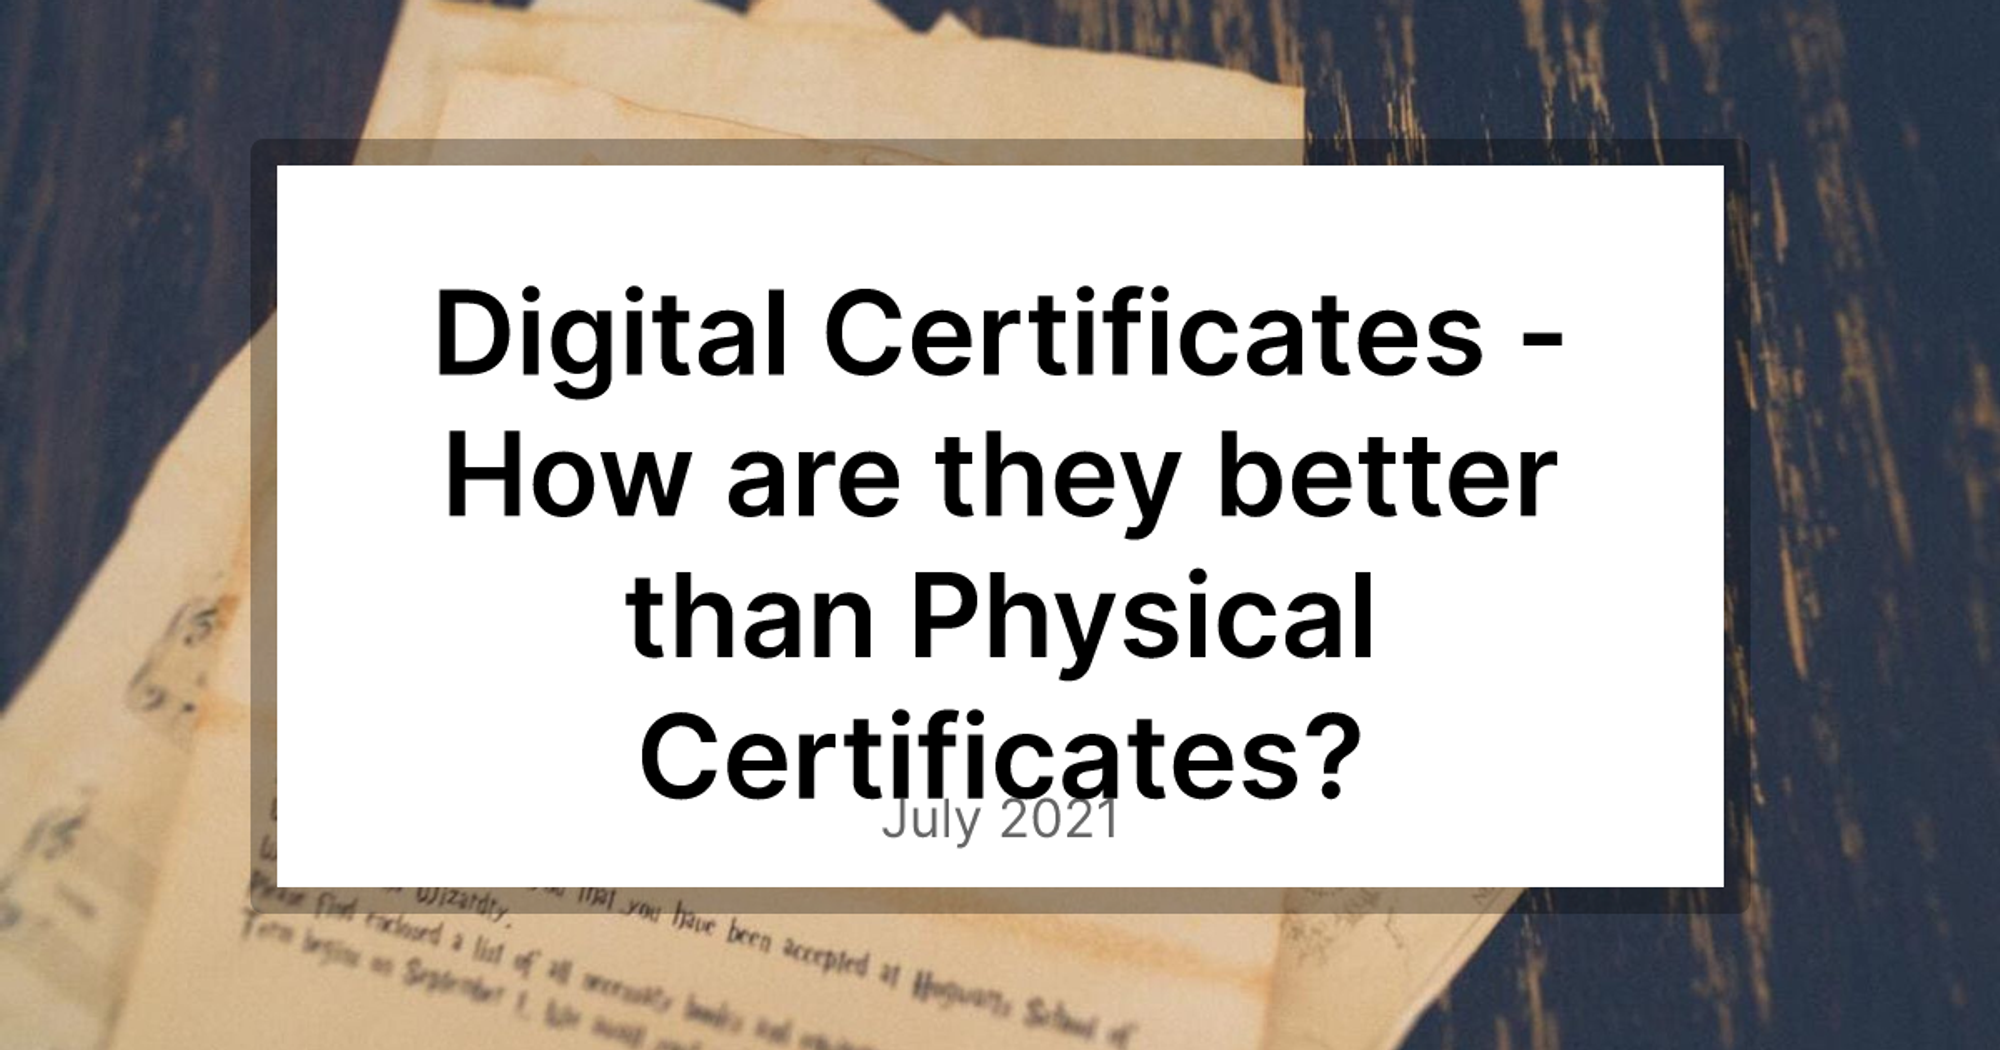 Digital Certificates - How are they better than Physical Certificates?